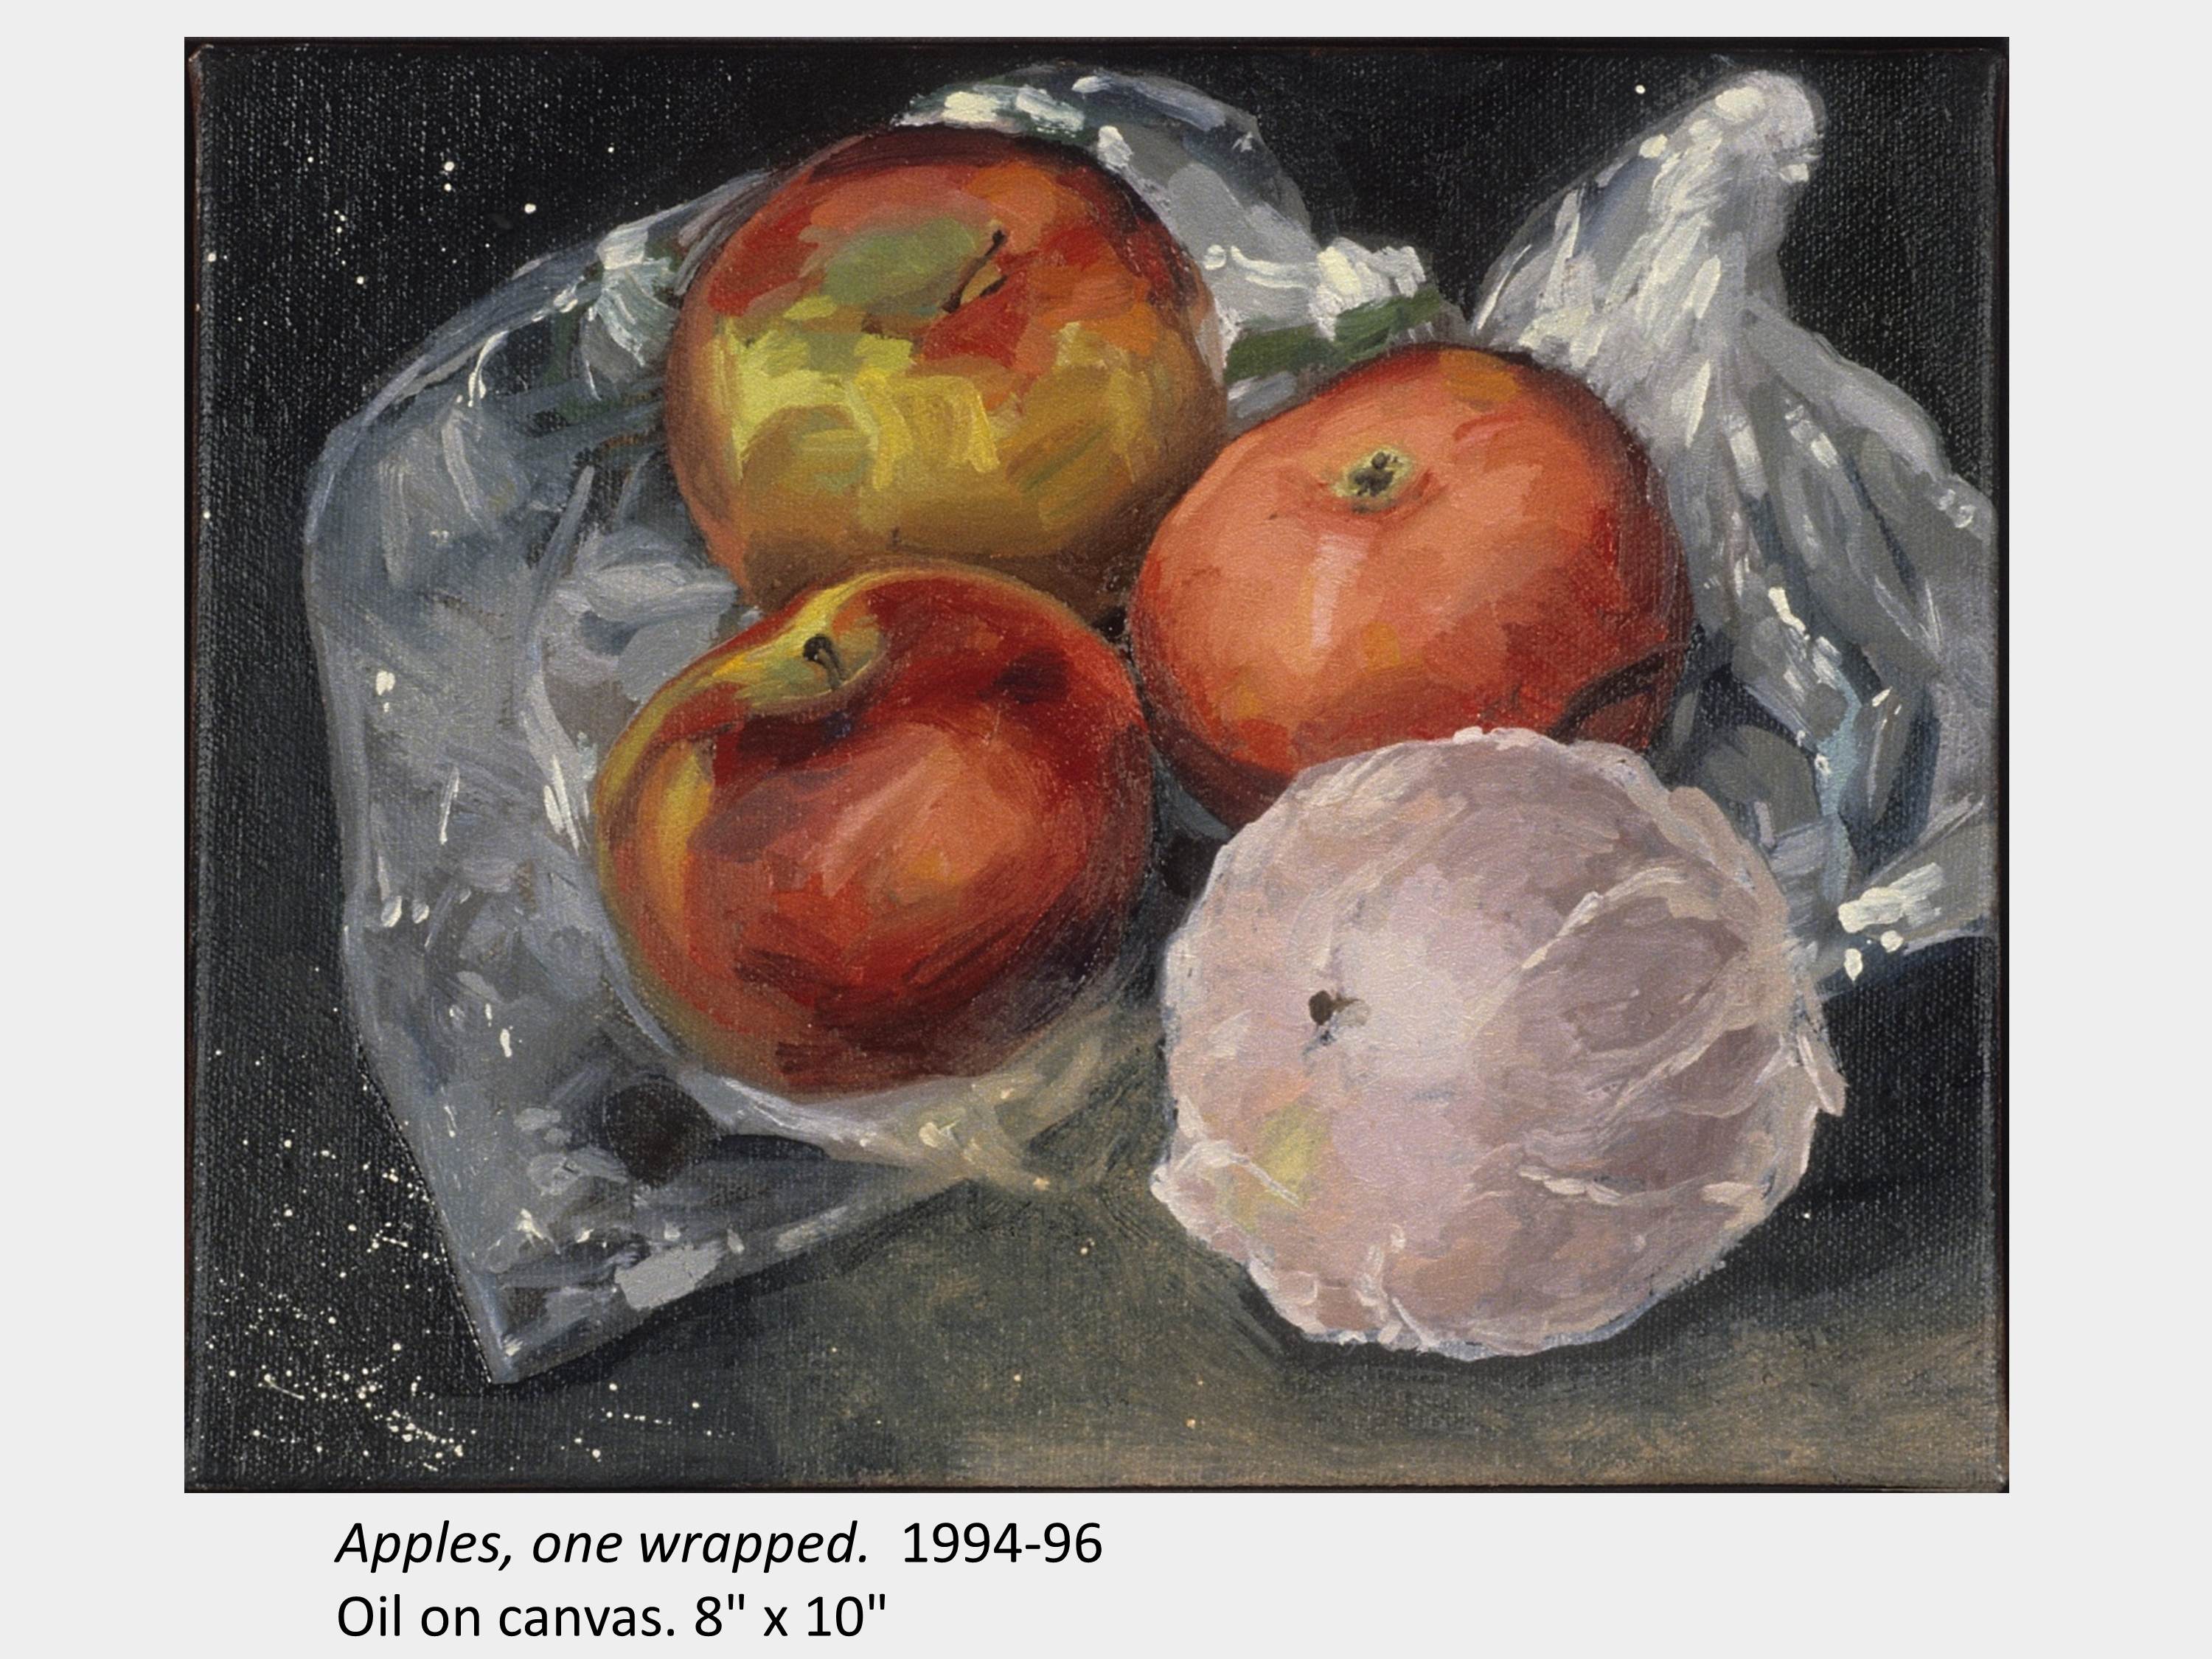 Artwork by Joanna Strong. Apples, one wrapped. 1994-96. Oil on canvas. 8" x 10"